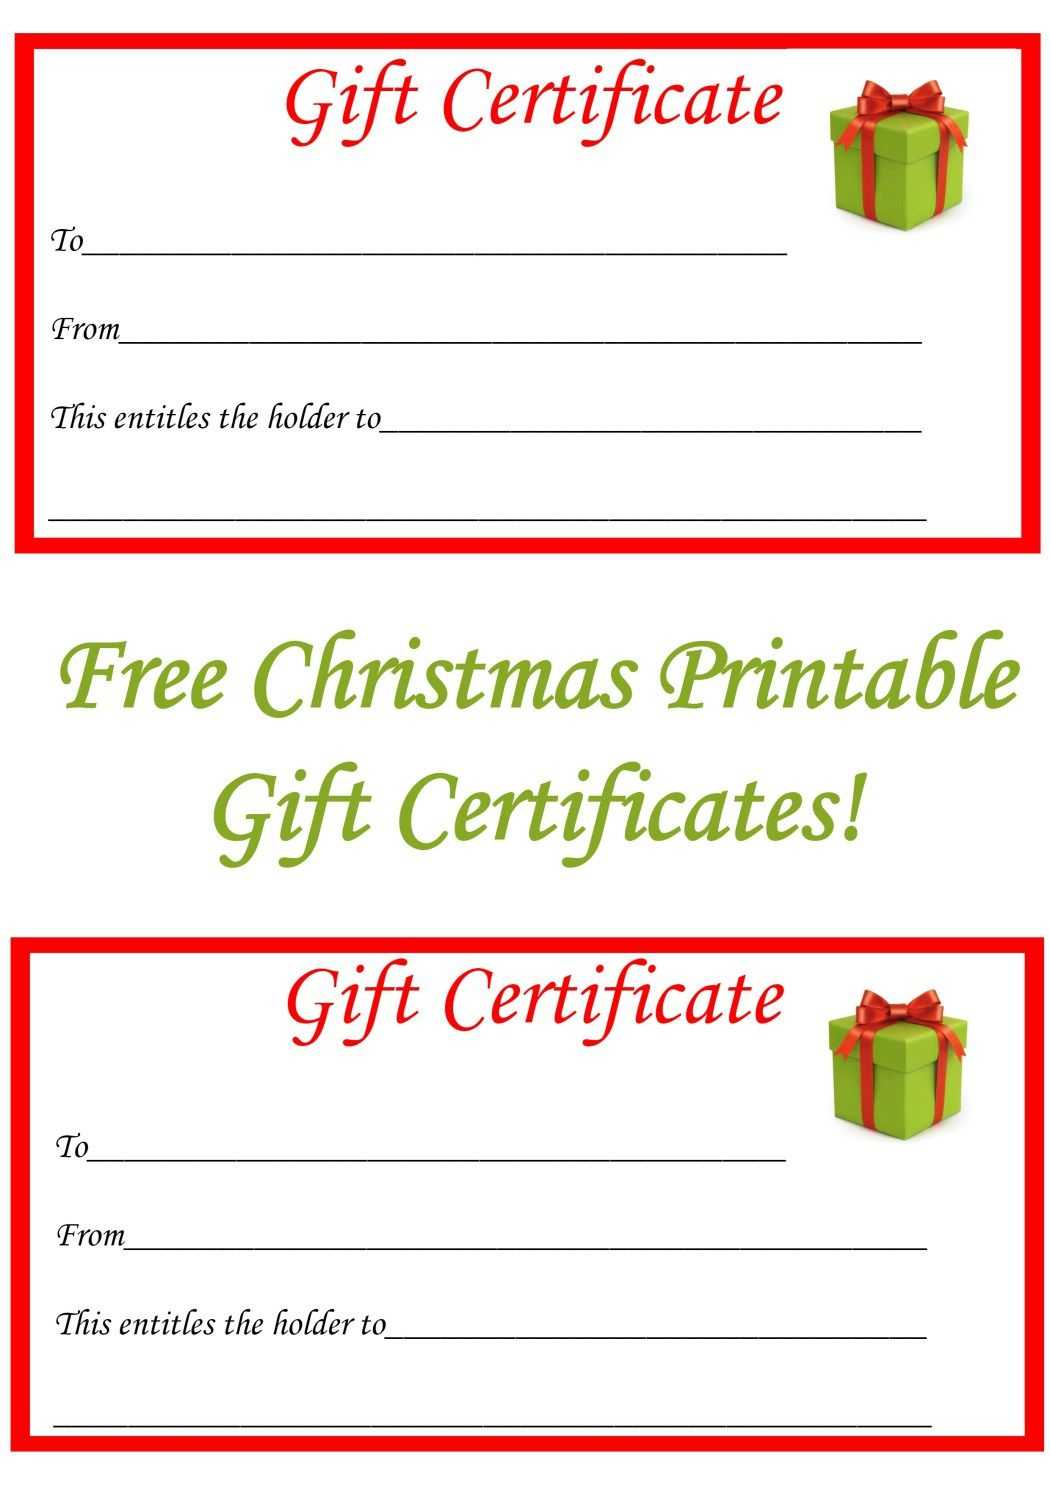 Free Christmas Printable Gift Certificates | Gift Ideas Pertaining To Homemade Gift Certificate Template